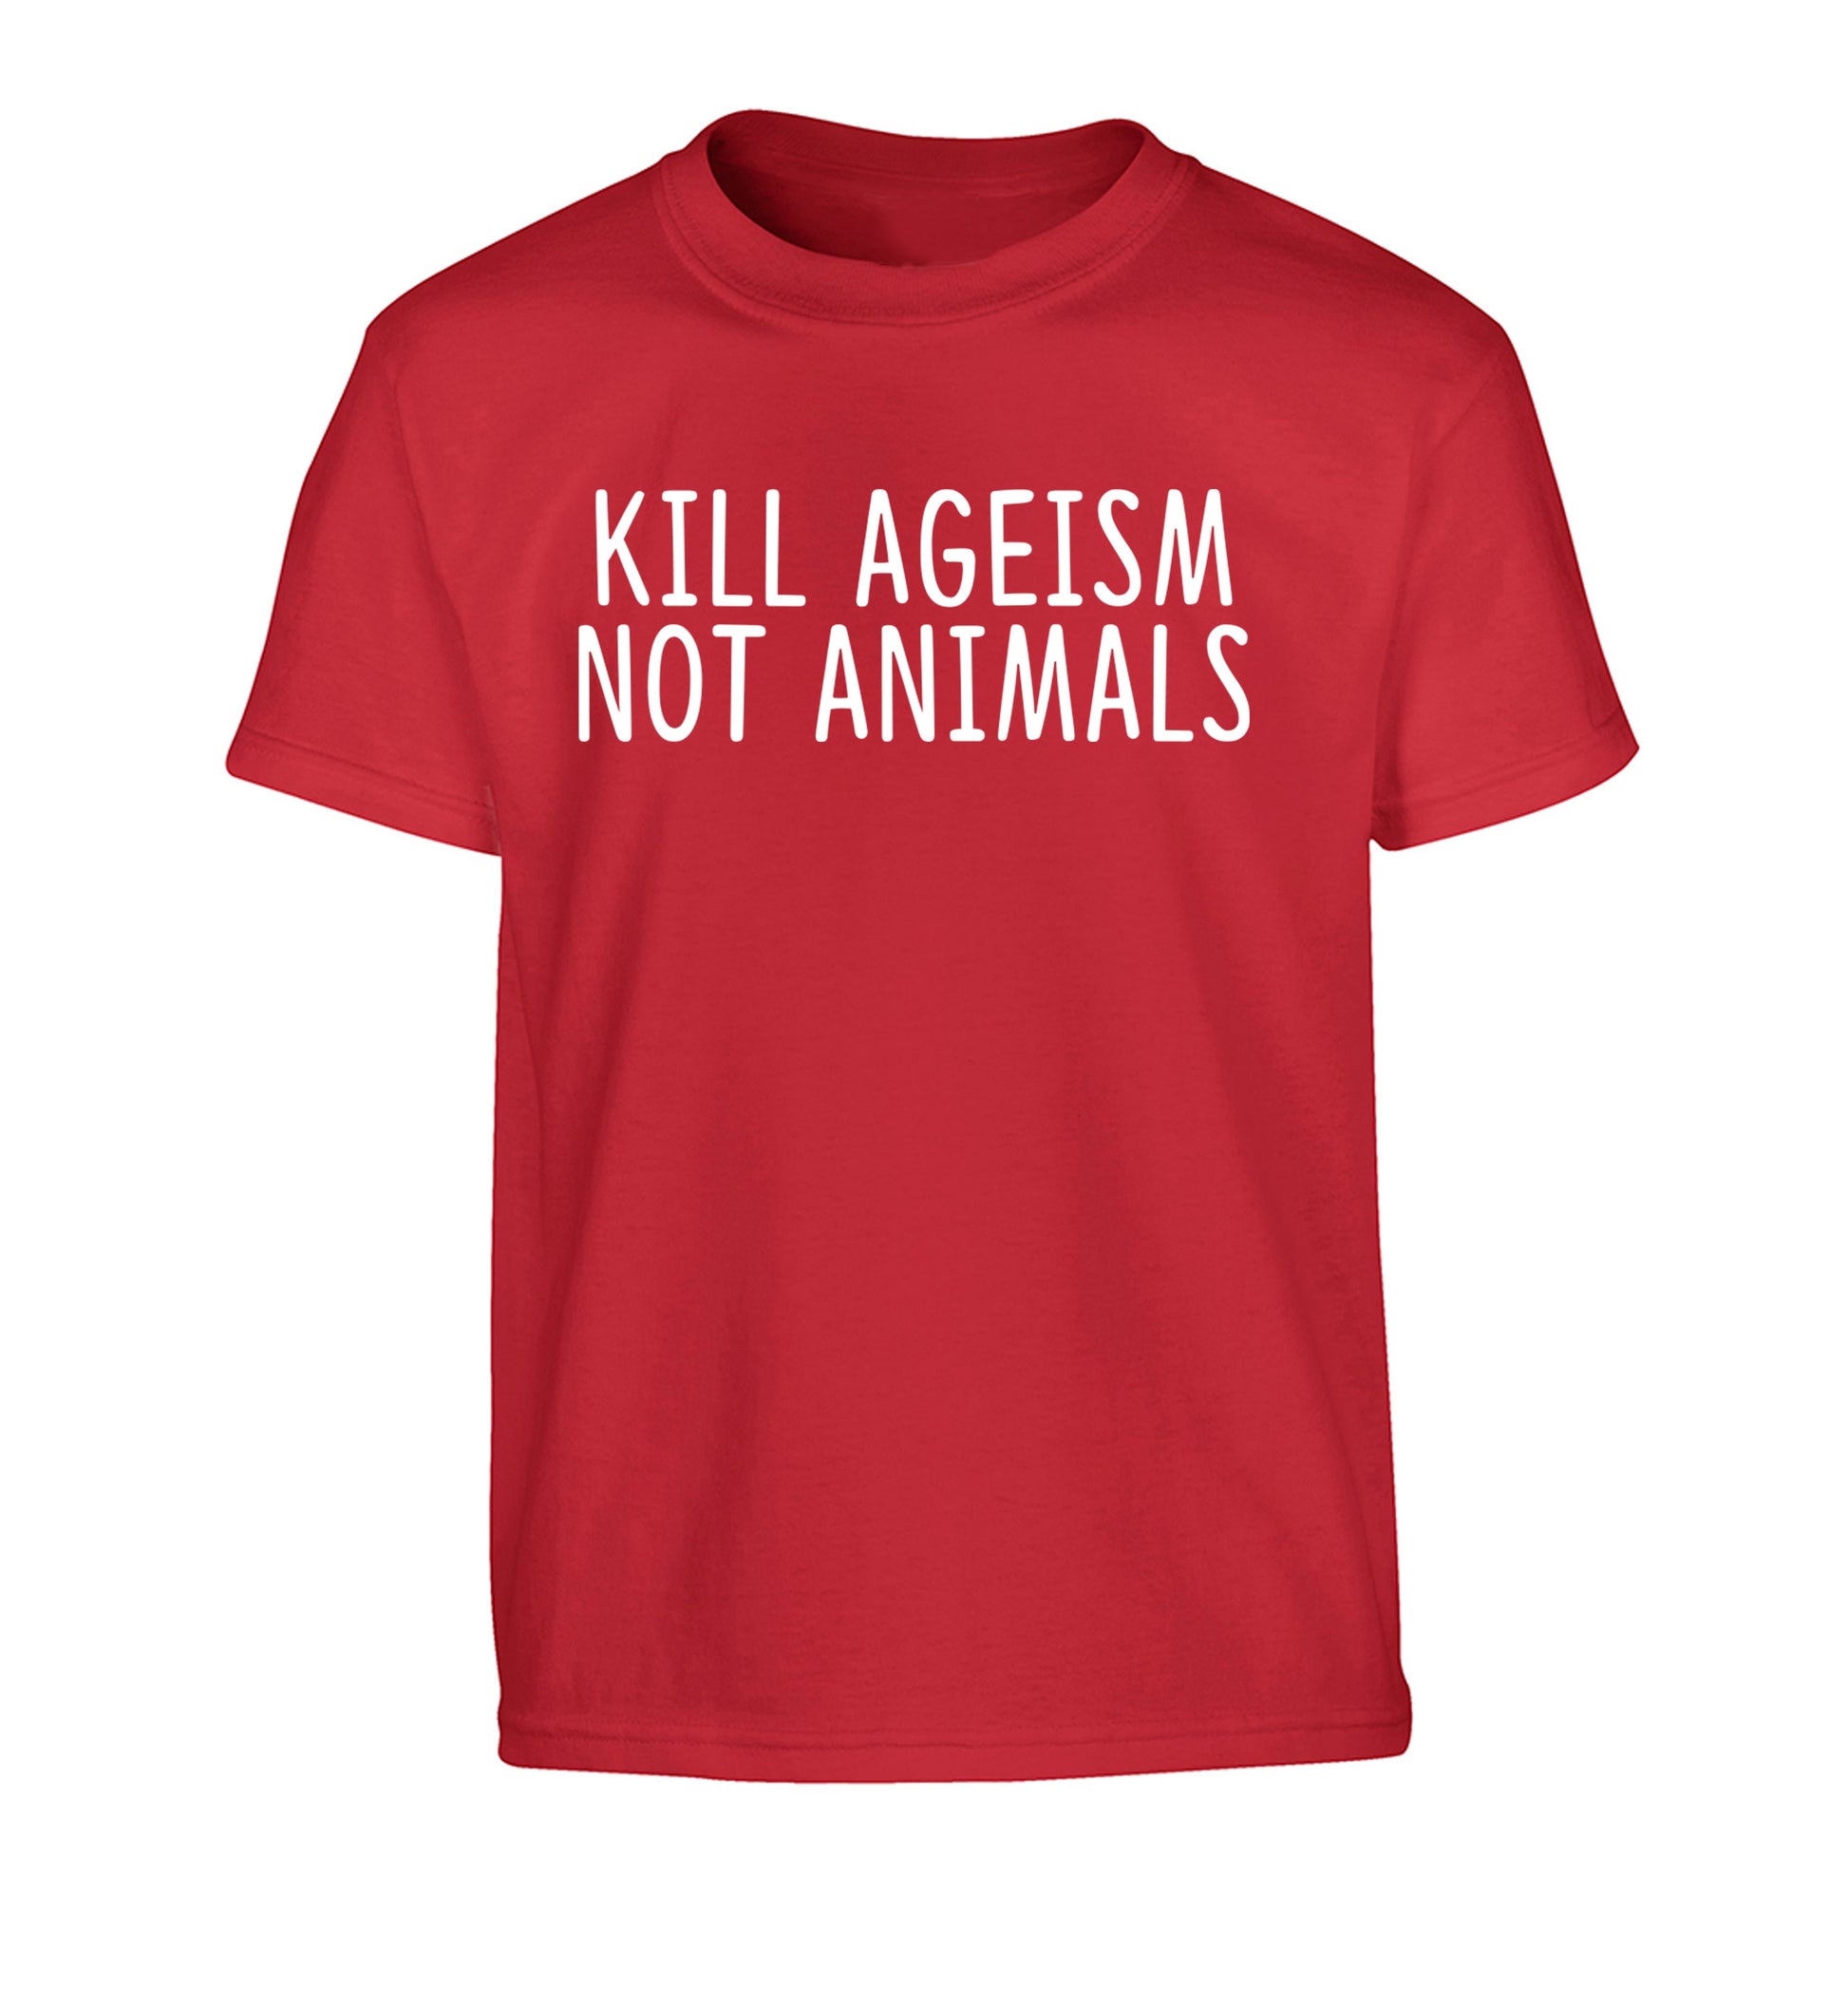 Kill Ageism Not Animals Children's red Tshirt 12-13 Years